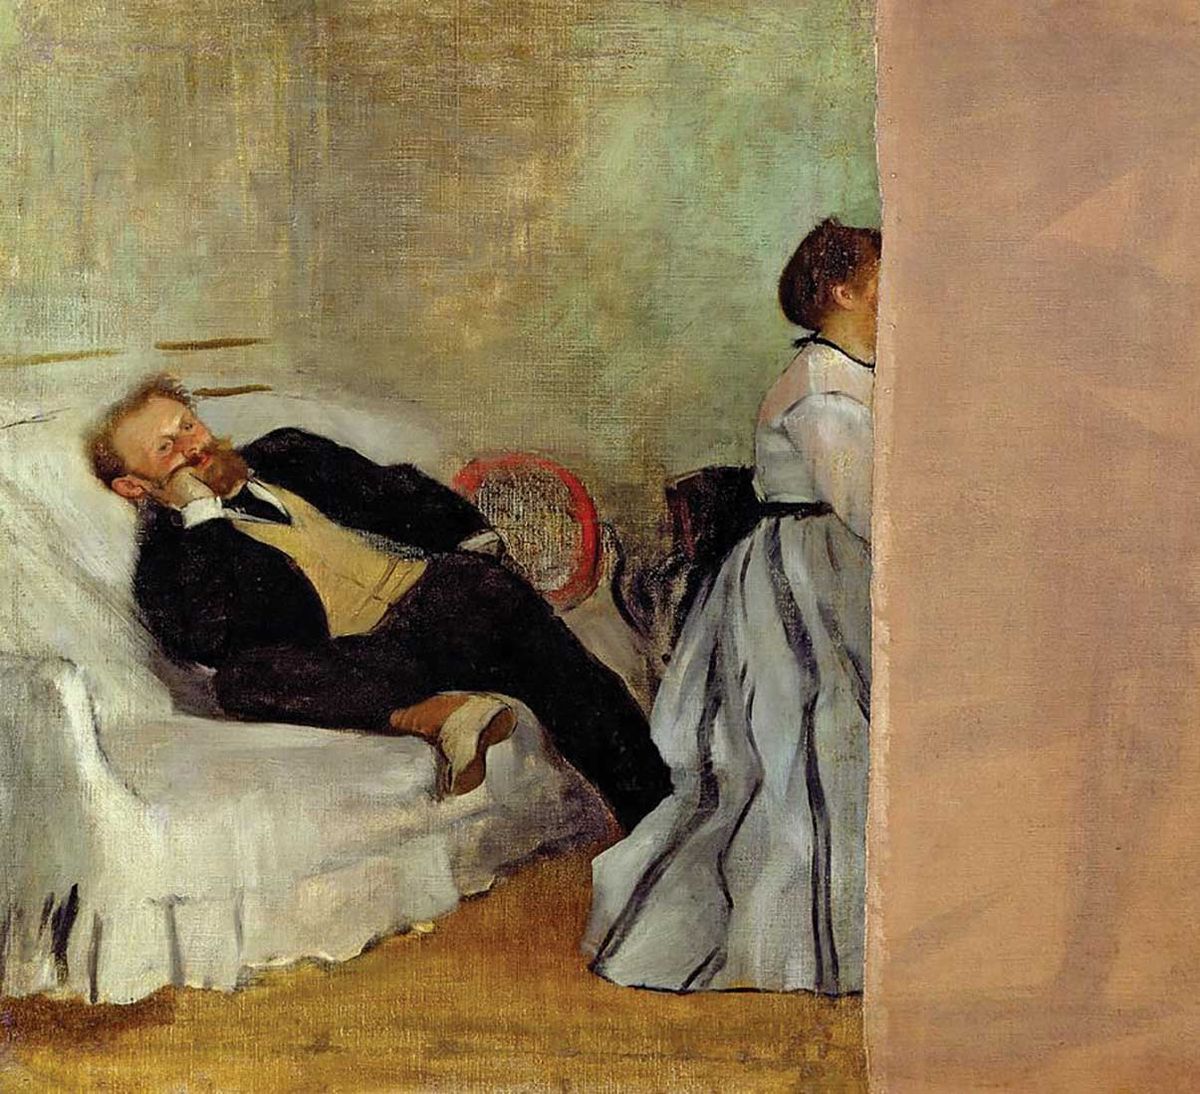 Edgar Degas’s Édouard Manet et sa femme (around 1868-69). Manet was unhappy with the “deformation” of his wife Suzanne’s features and cut her face out of the painting

Kitakyushu Municipal Museum of Art



